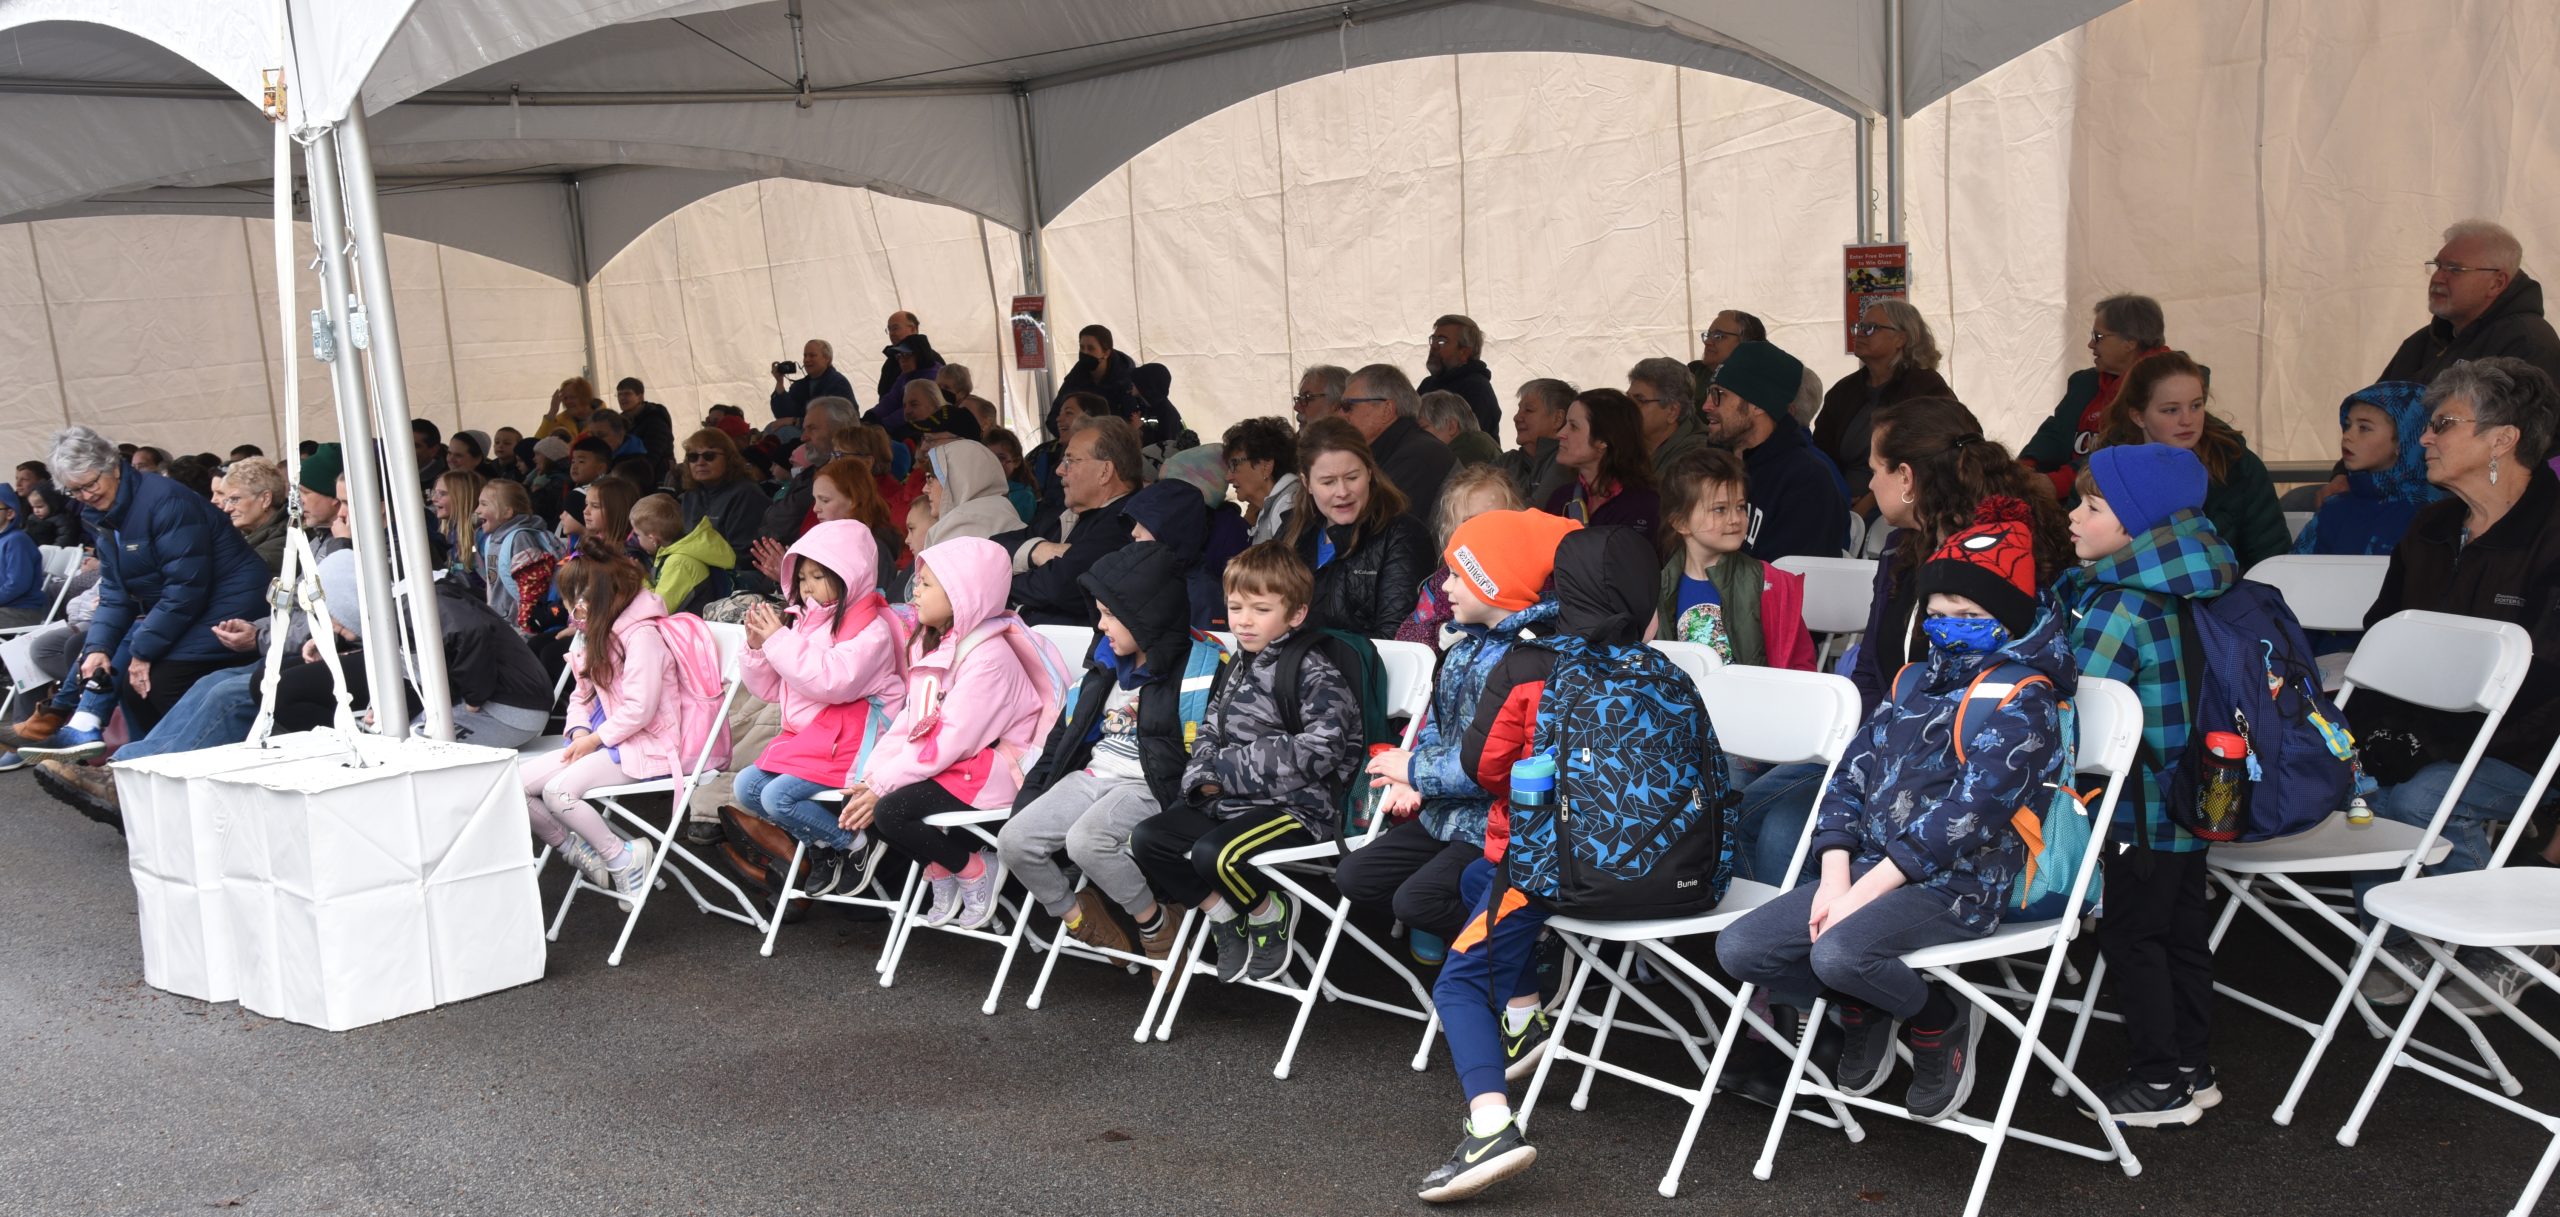 Dozens of adults and young students seated beneath a tent listen and watch to glassmaking demonstrations.